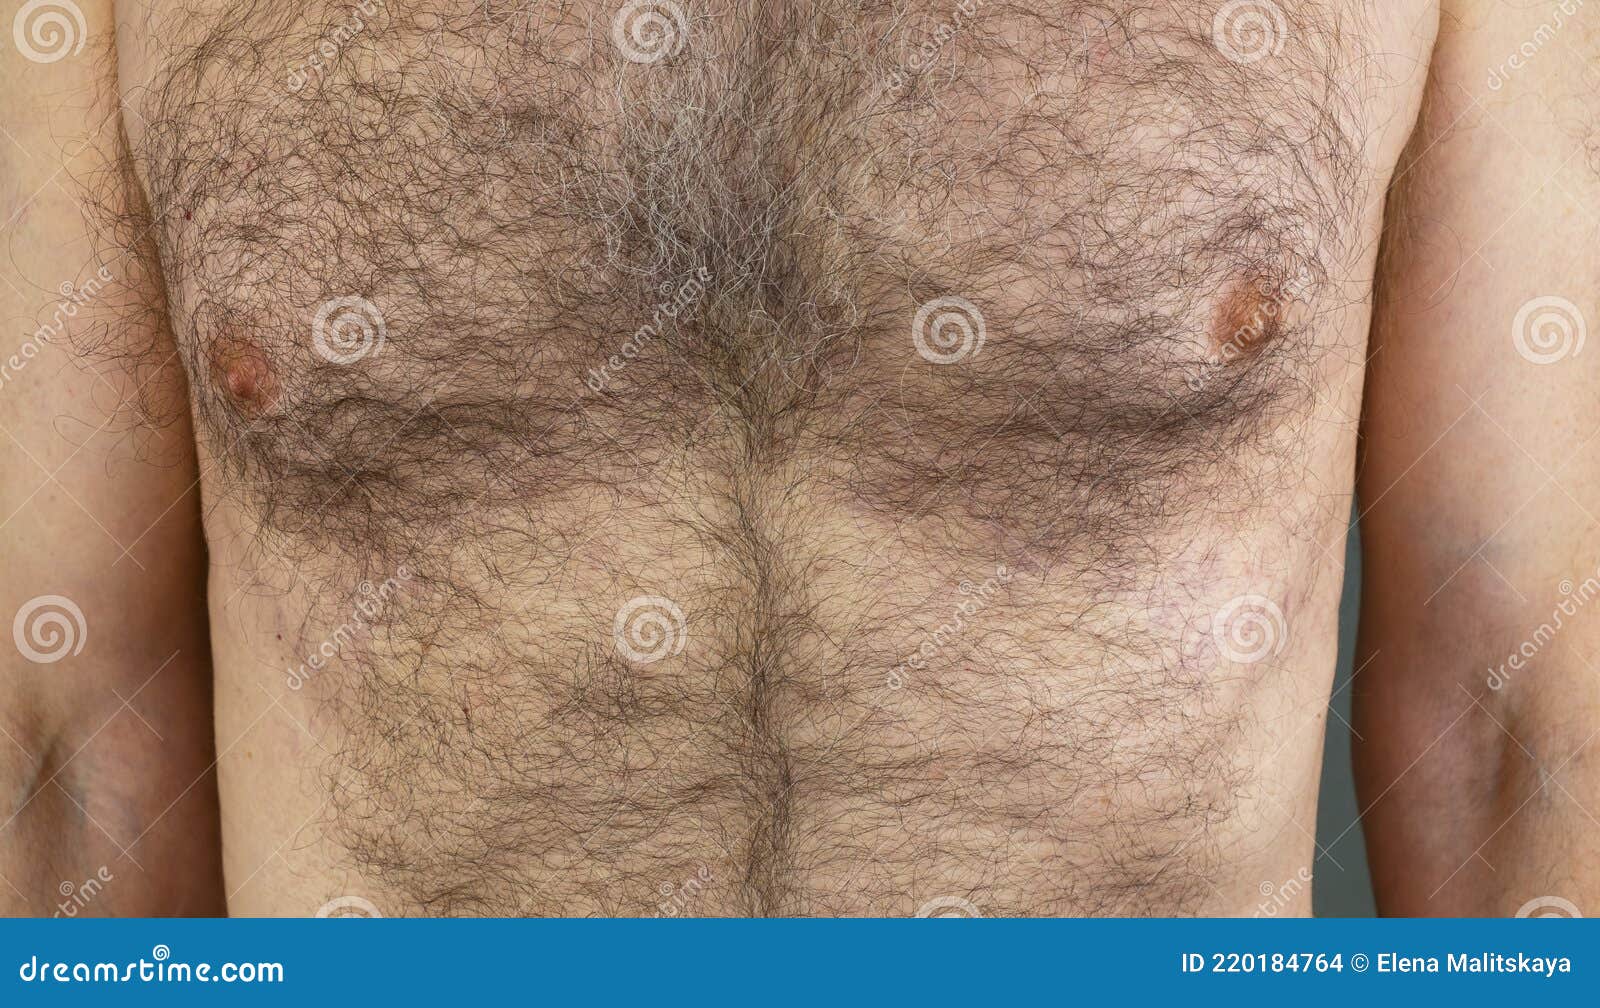 A Man with a Hairy Male Breast Close-up Stock Photo - Image of human,  detail: 220184764